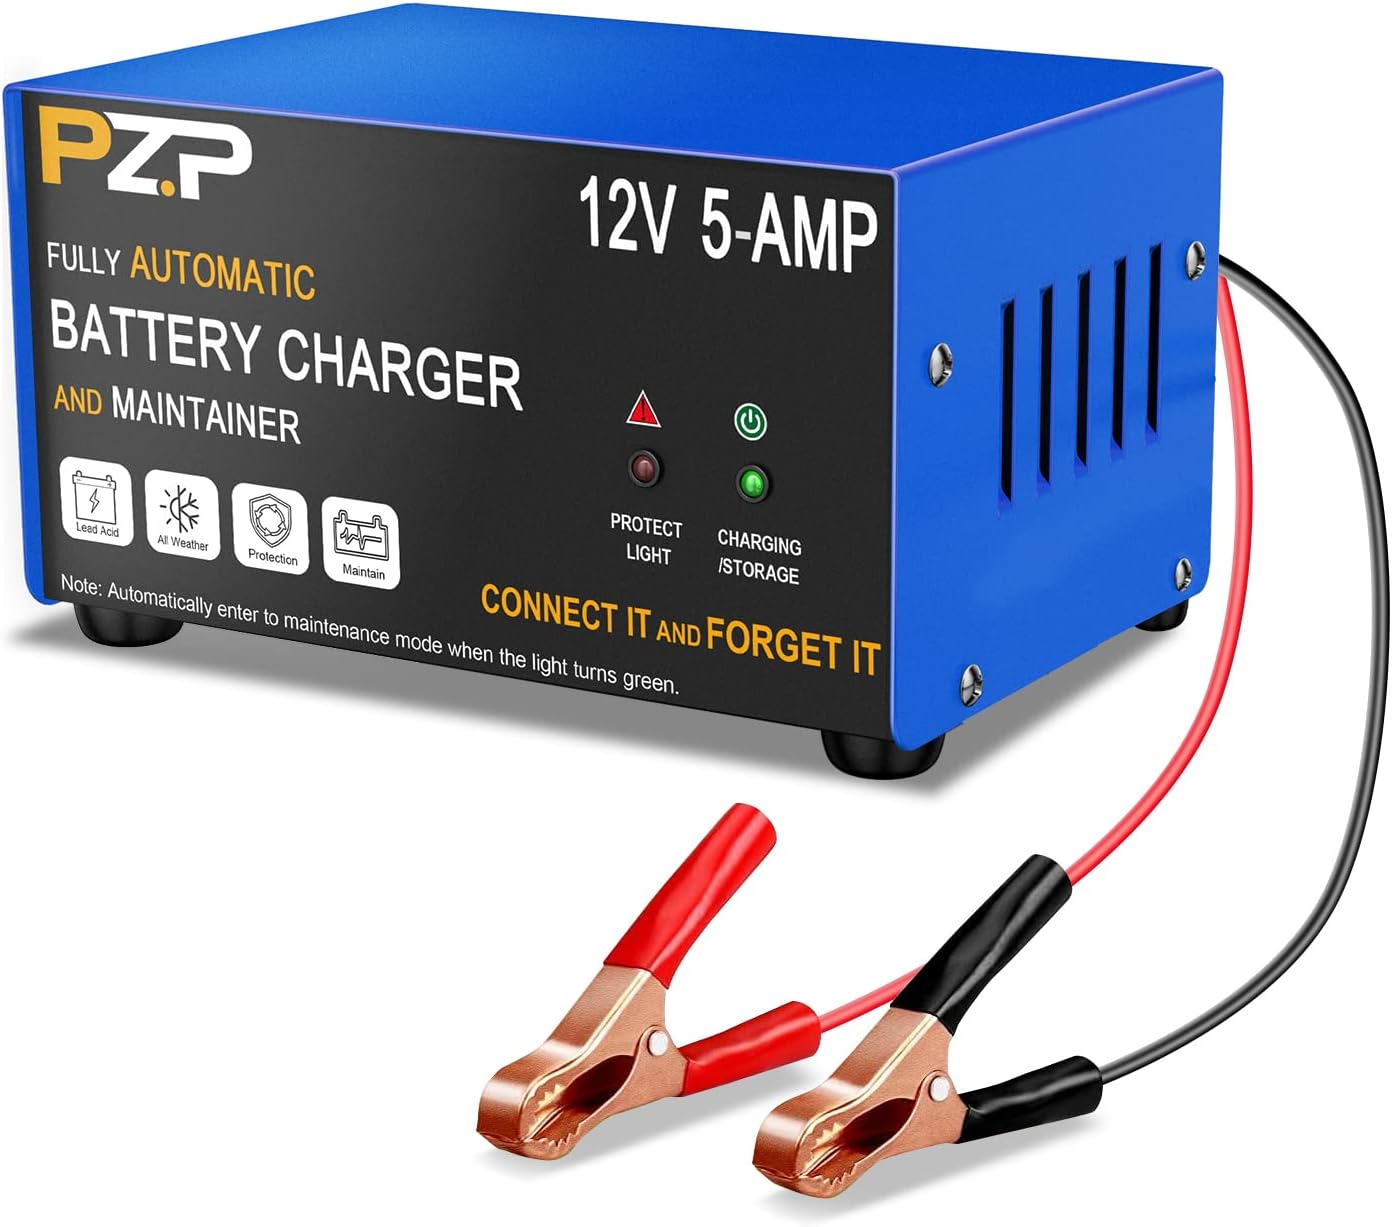 PZ.P 12V 5AMP Battery Charger Smart Marine and Automotive Battery Charger 12 Volt Trickle Charger Battery Maintainer Fully Automatic Car Deep Cycle Charger for Lawn Mower RV Motorcycle Boat Auto ATV - PZ.P 12V 5AMP Battery Charger Smart Marine And Automotive Battery Charger Review